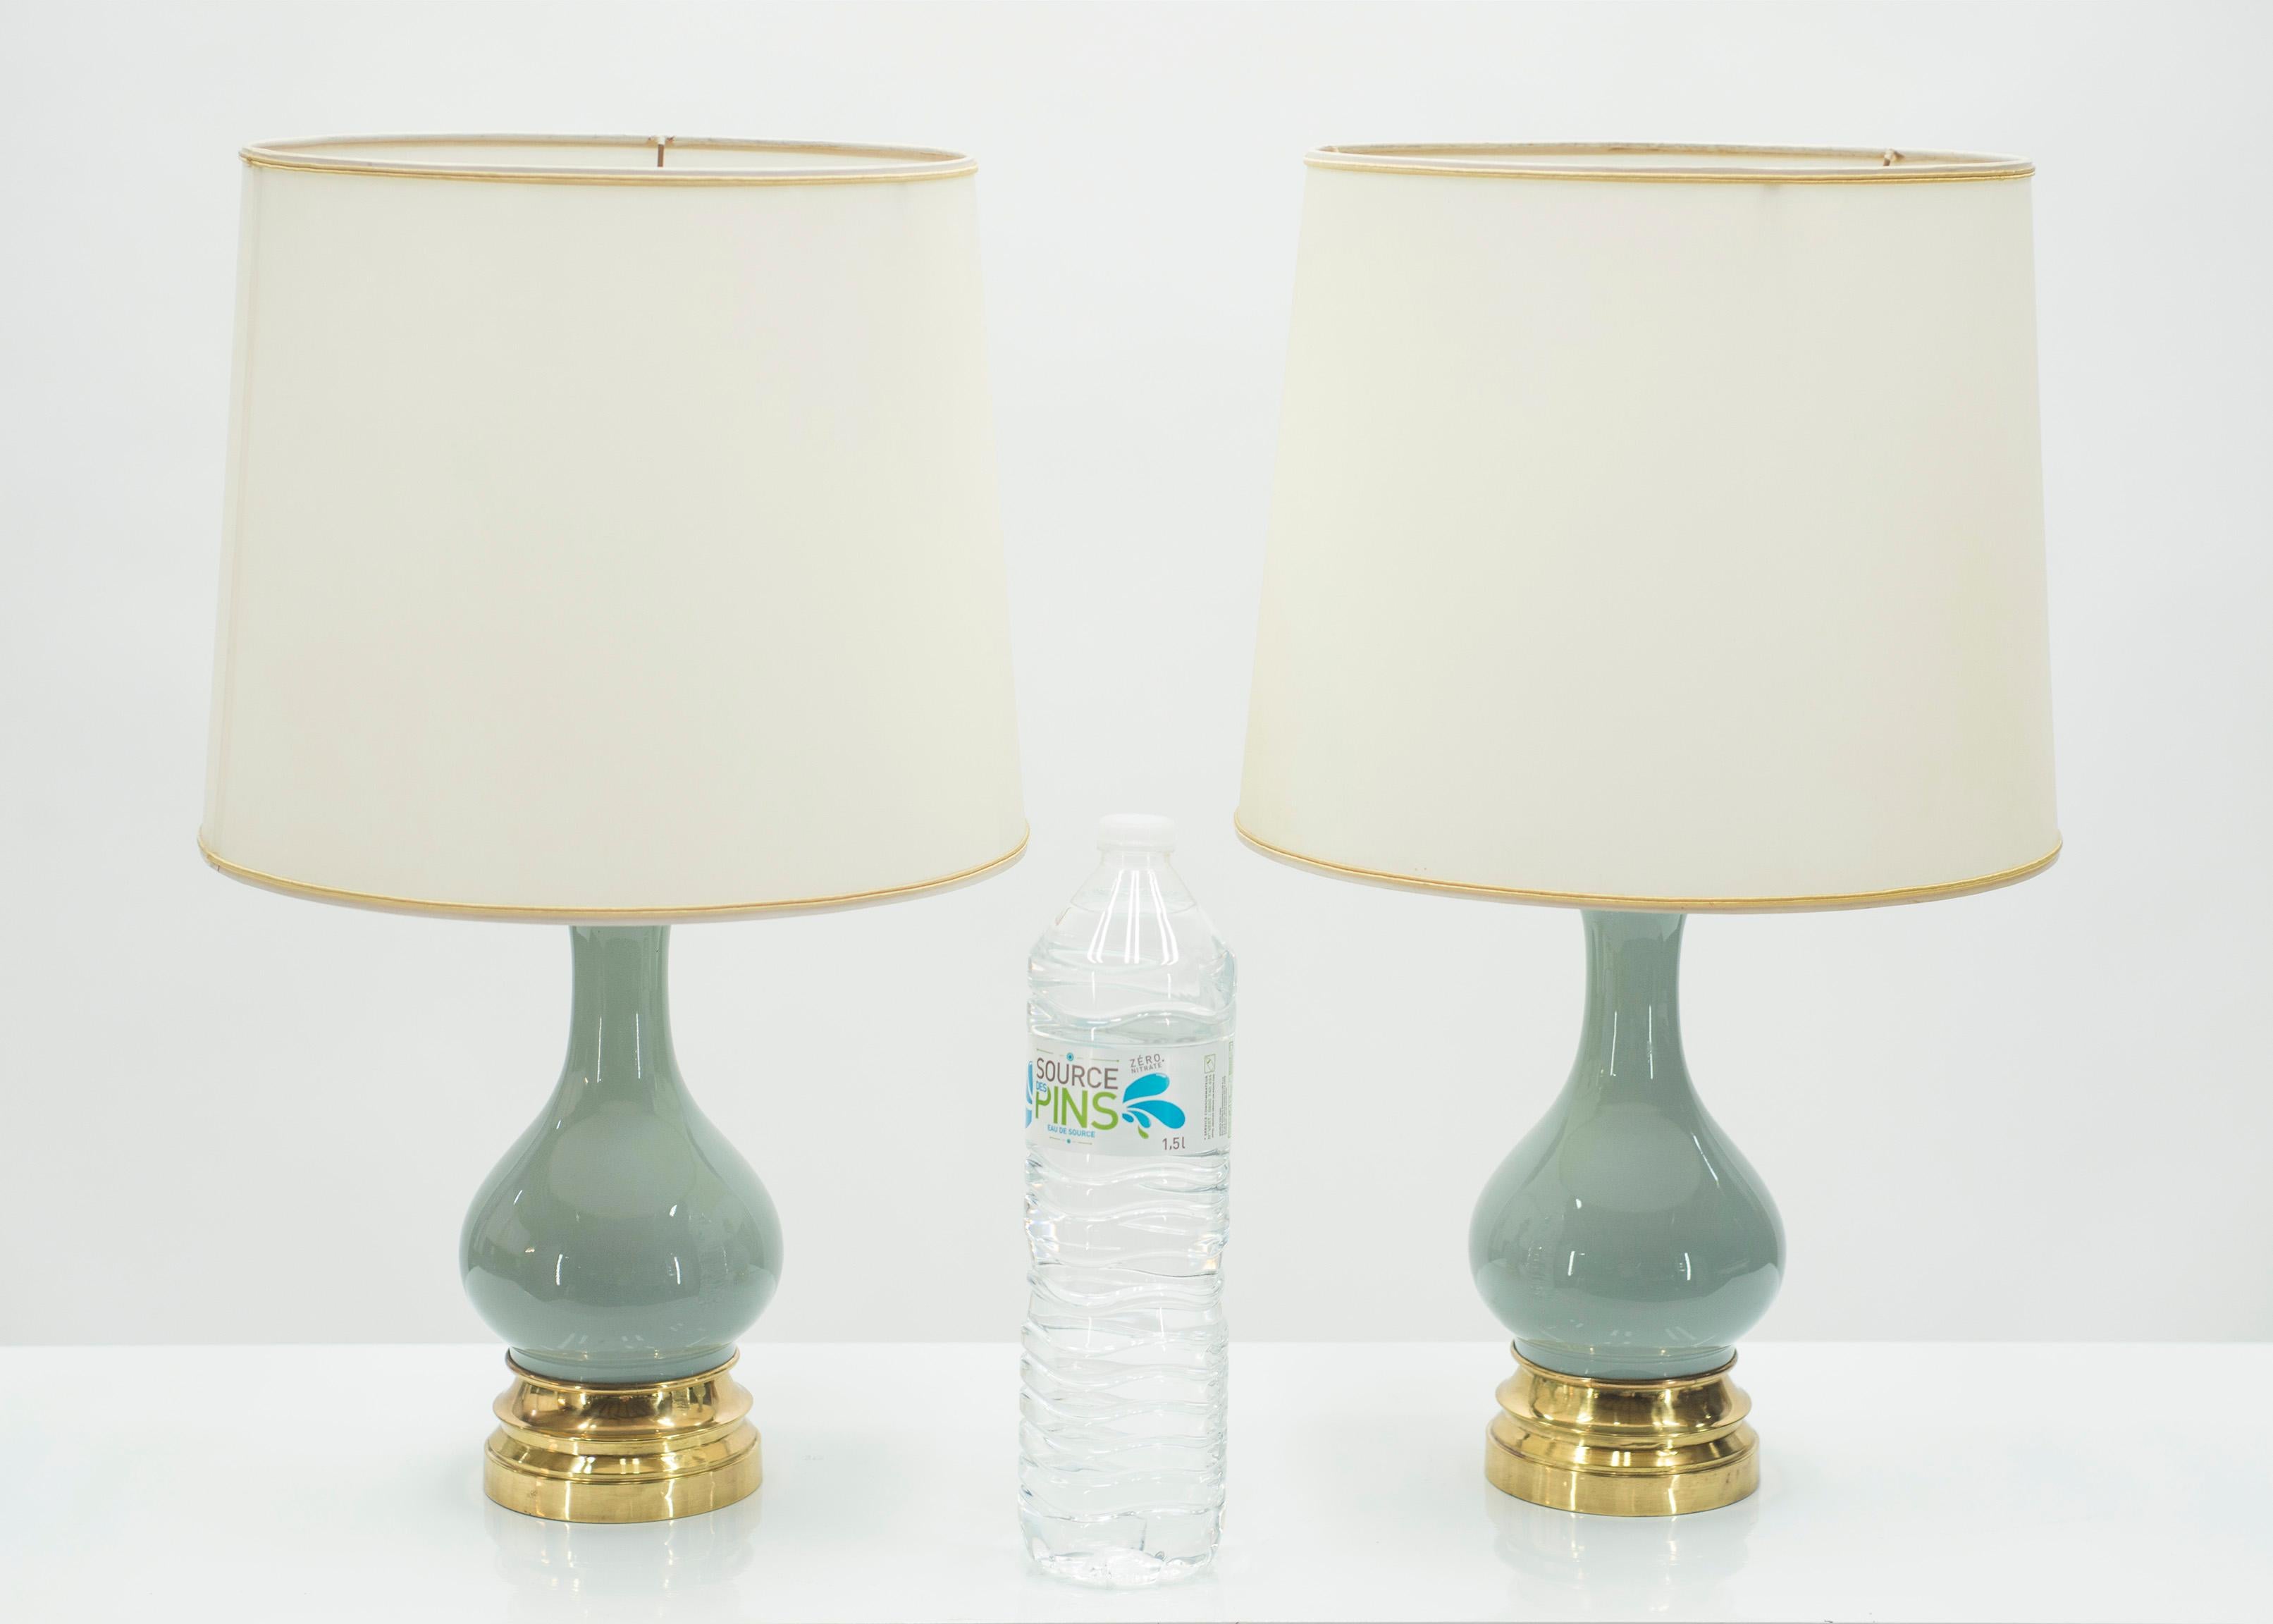 Mid-20th Century Midcentury Pair of French Light Blue Ceramic and Brass Lamps, 1960s